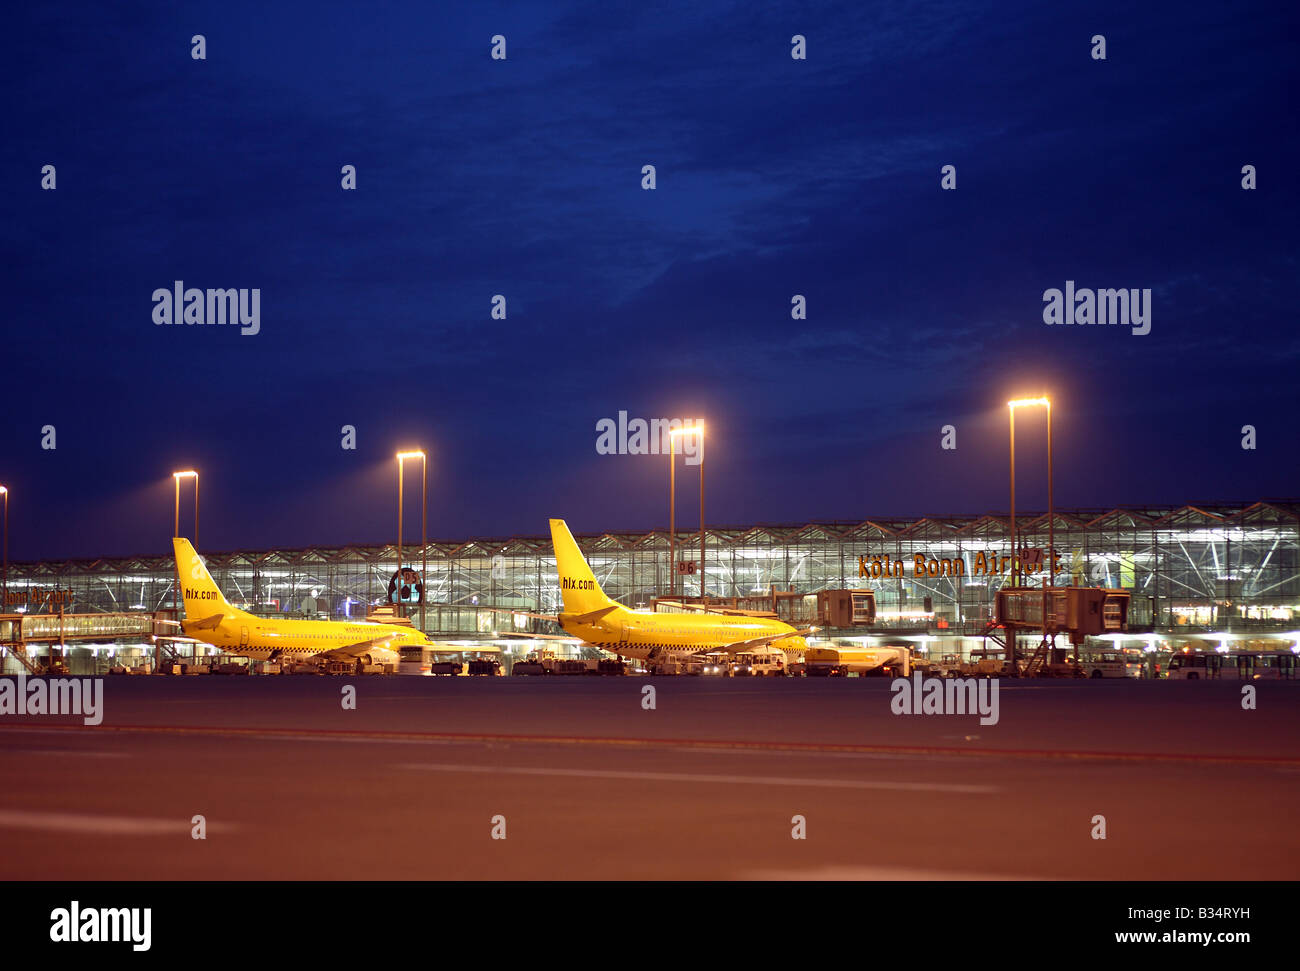 Airplanes at the Koeln Bonn Airport, Cologne, Germany Stock Photo